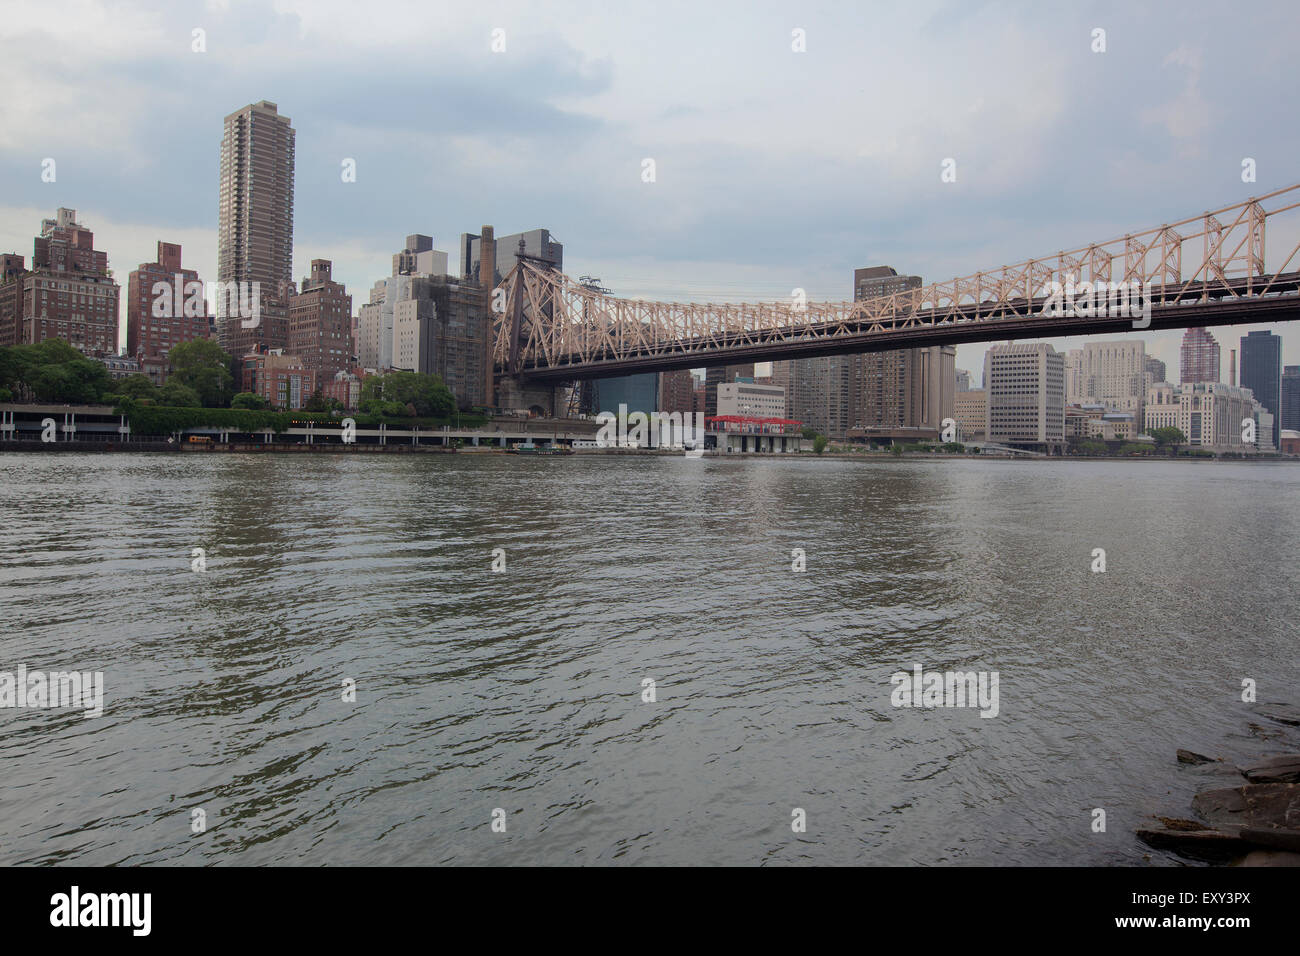 NEW YORK - May 28, 2015: The view of midtown Manhattan buildings on the Hudson River, from Roosevelt Island.The Queensboro bridg Stock Photo